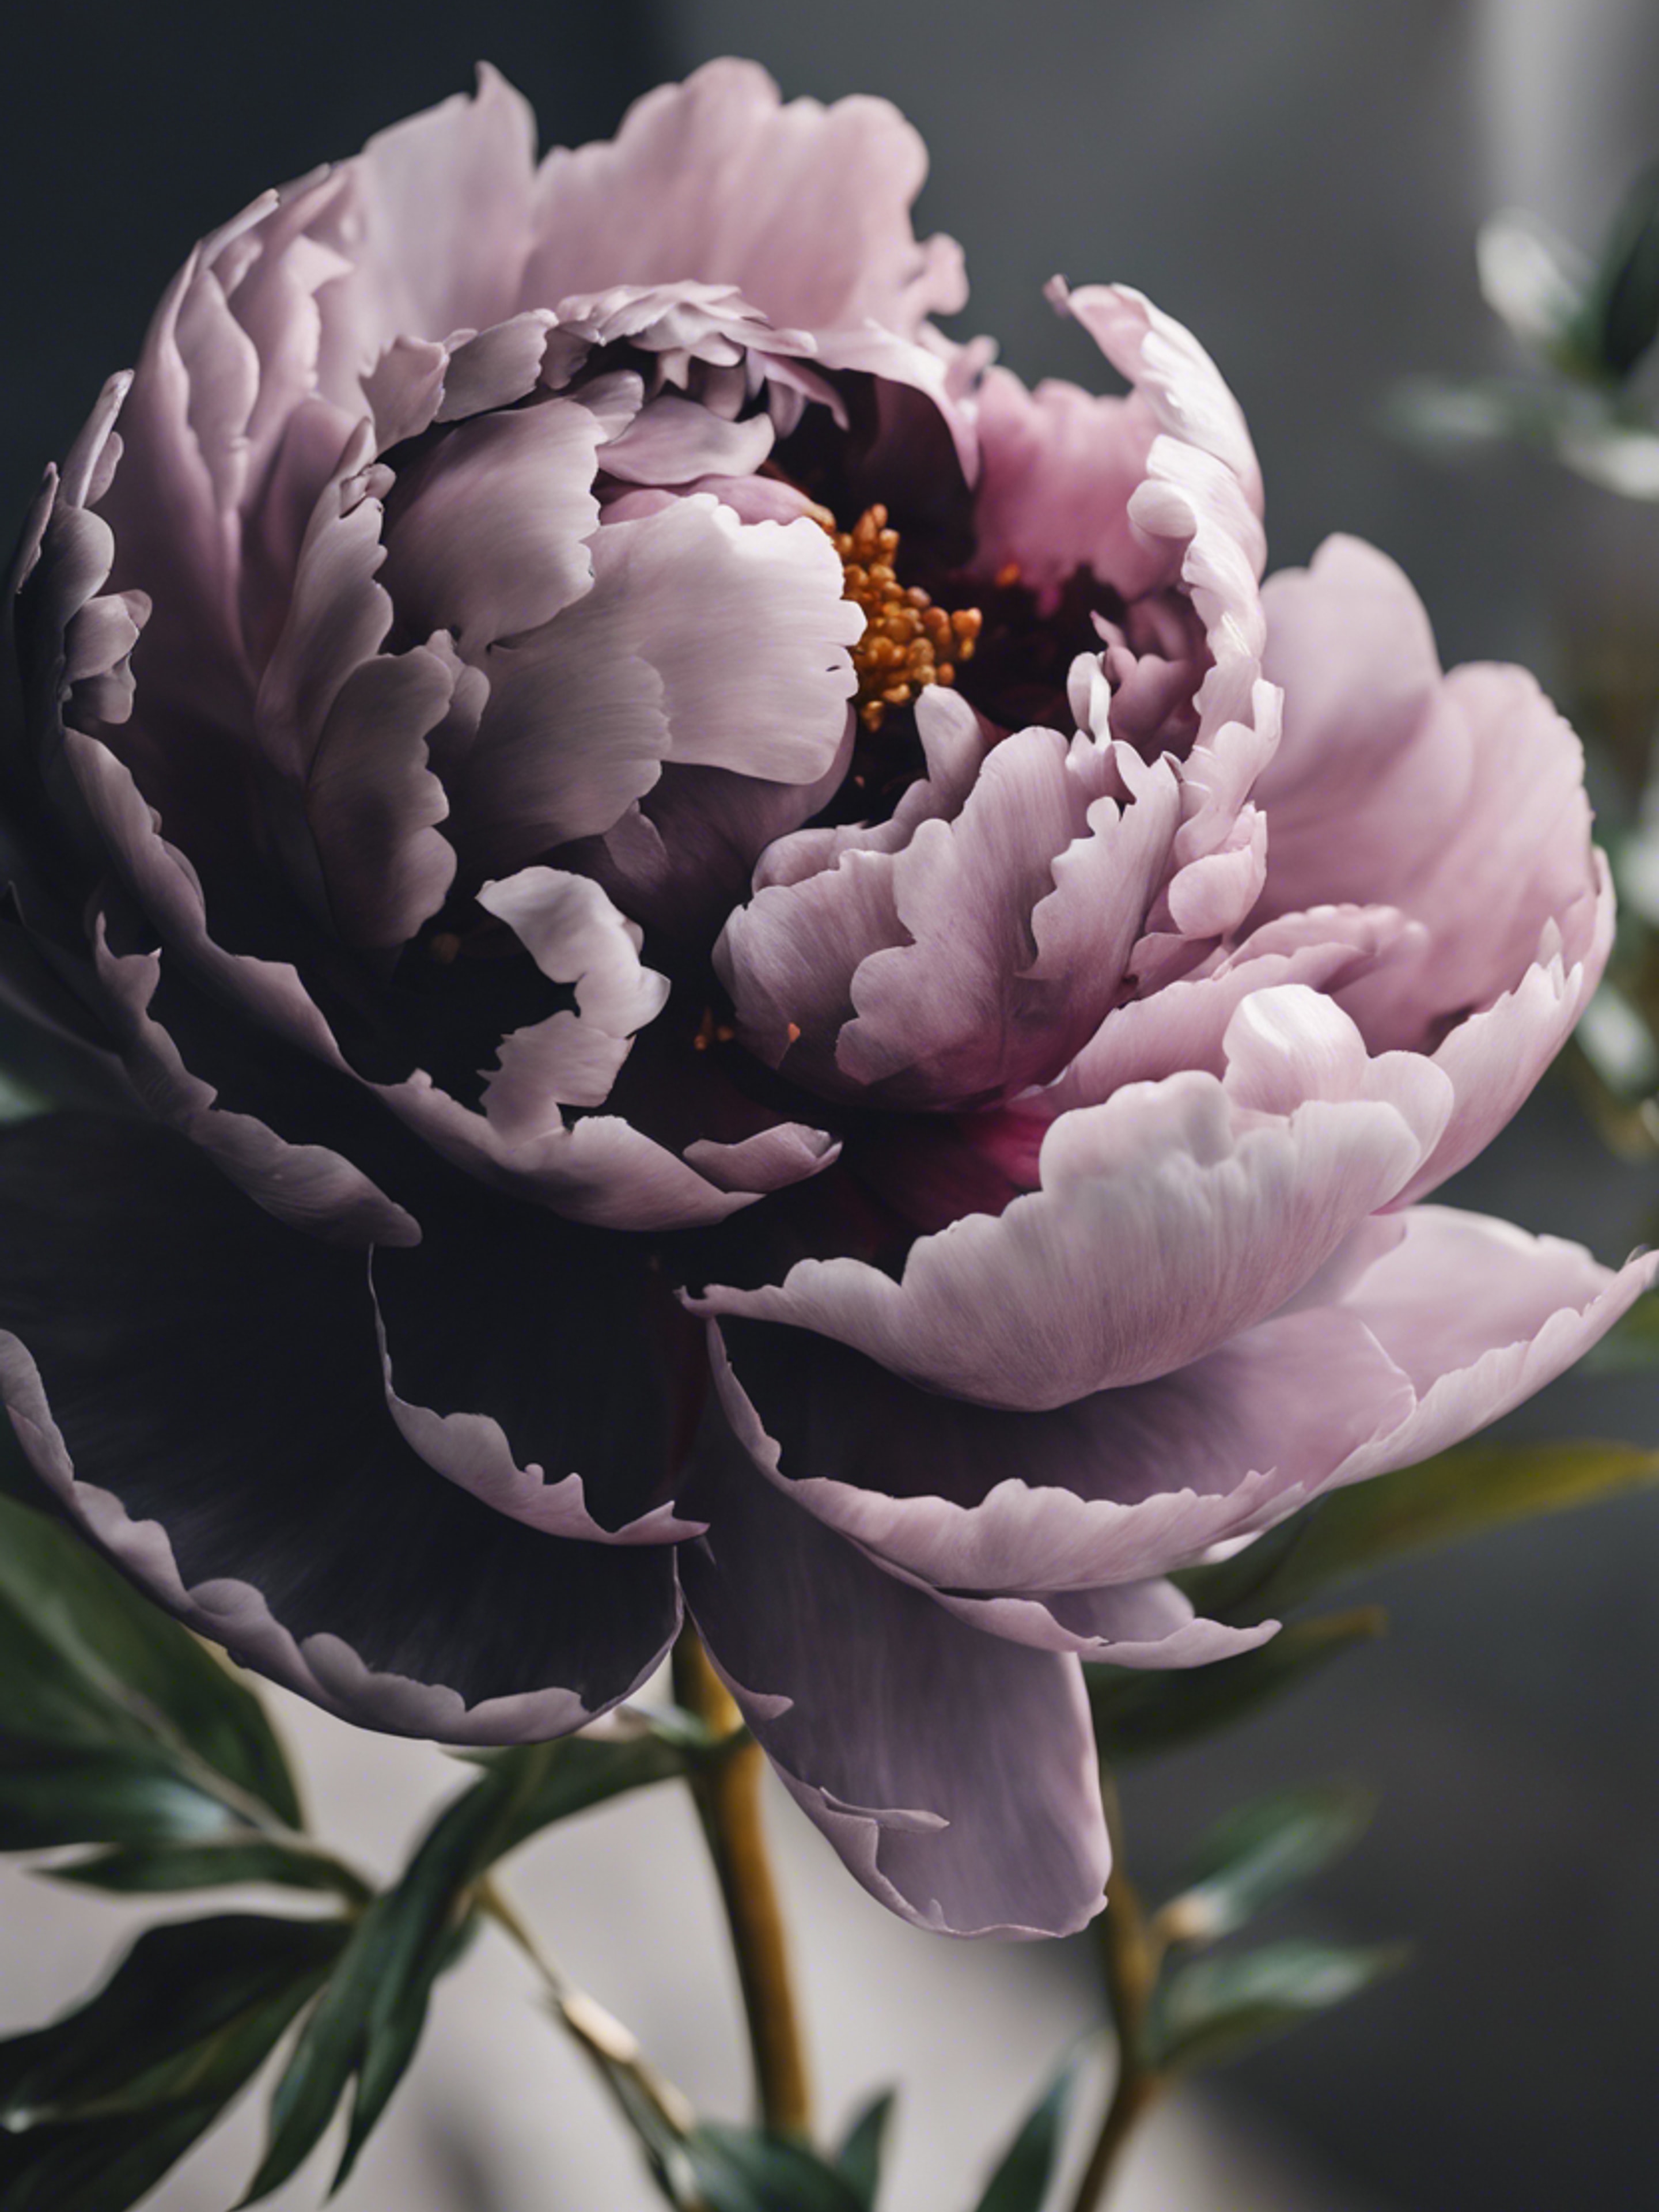 A black peony, the symbol of prosperity and honor, complementing a traditional Asian painting. 벽지[2c78f74174874eadaf7e]